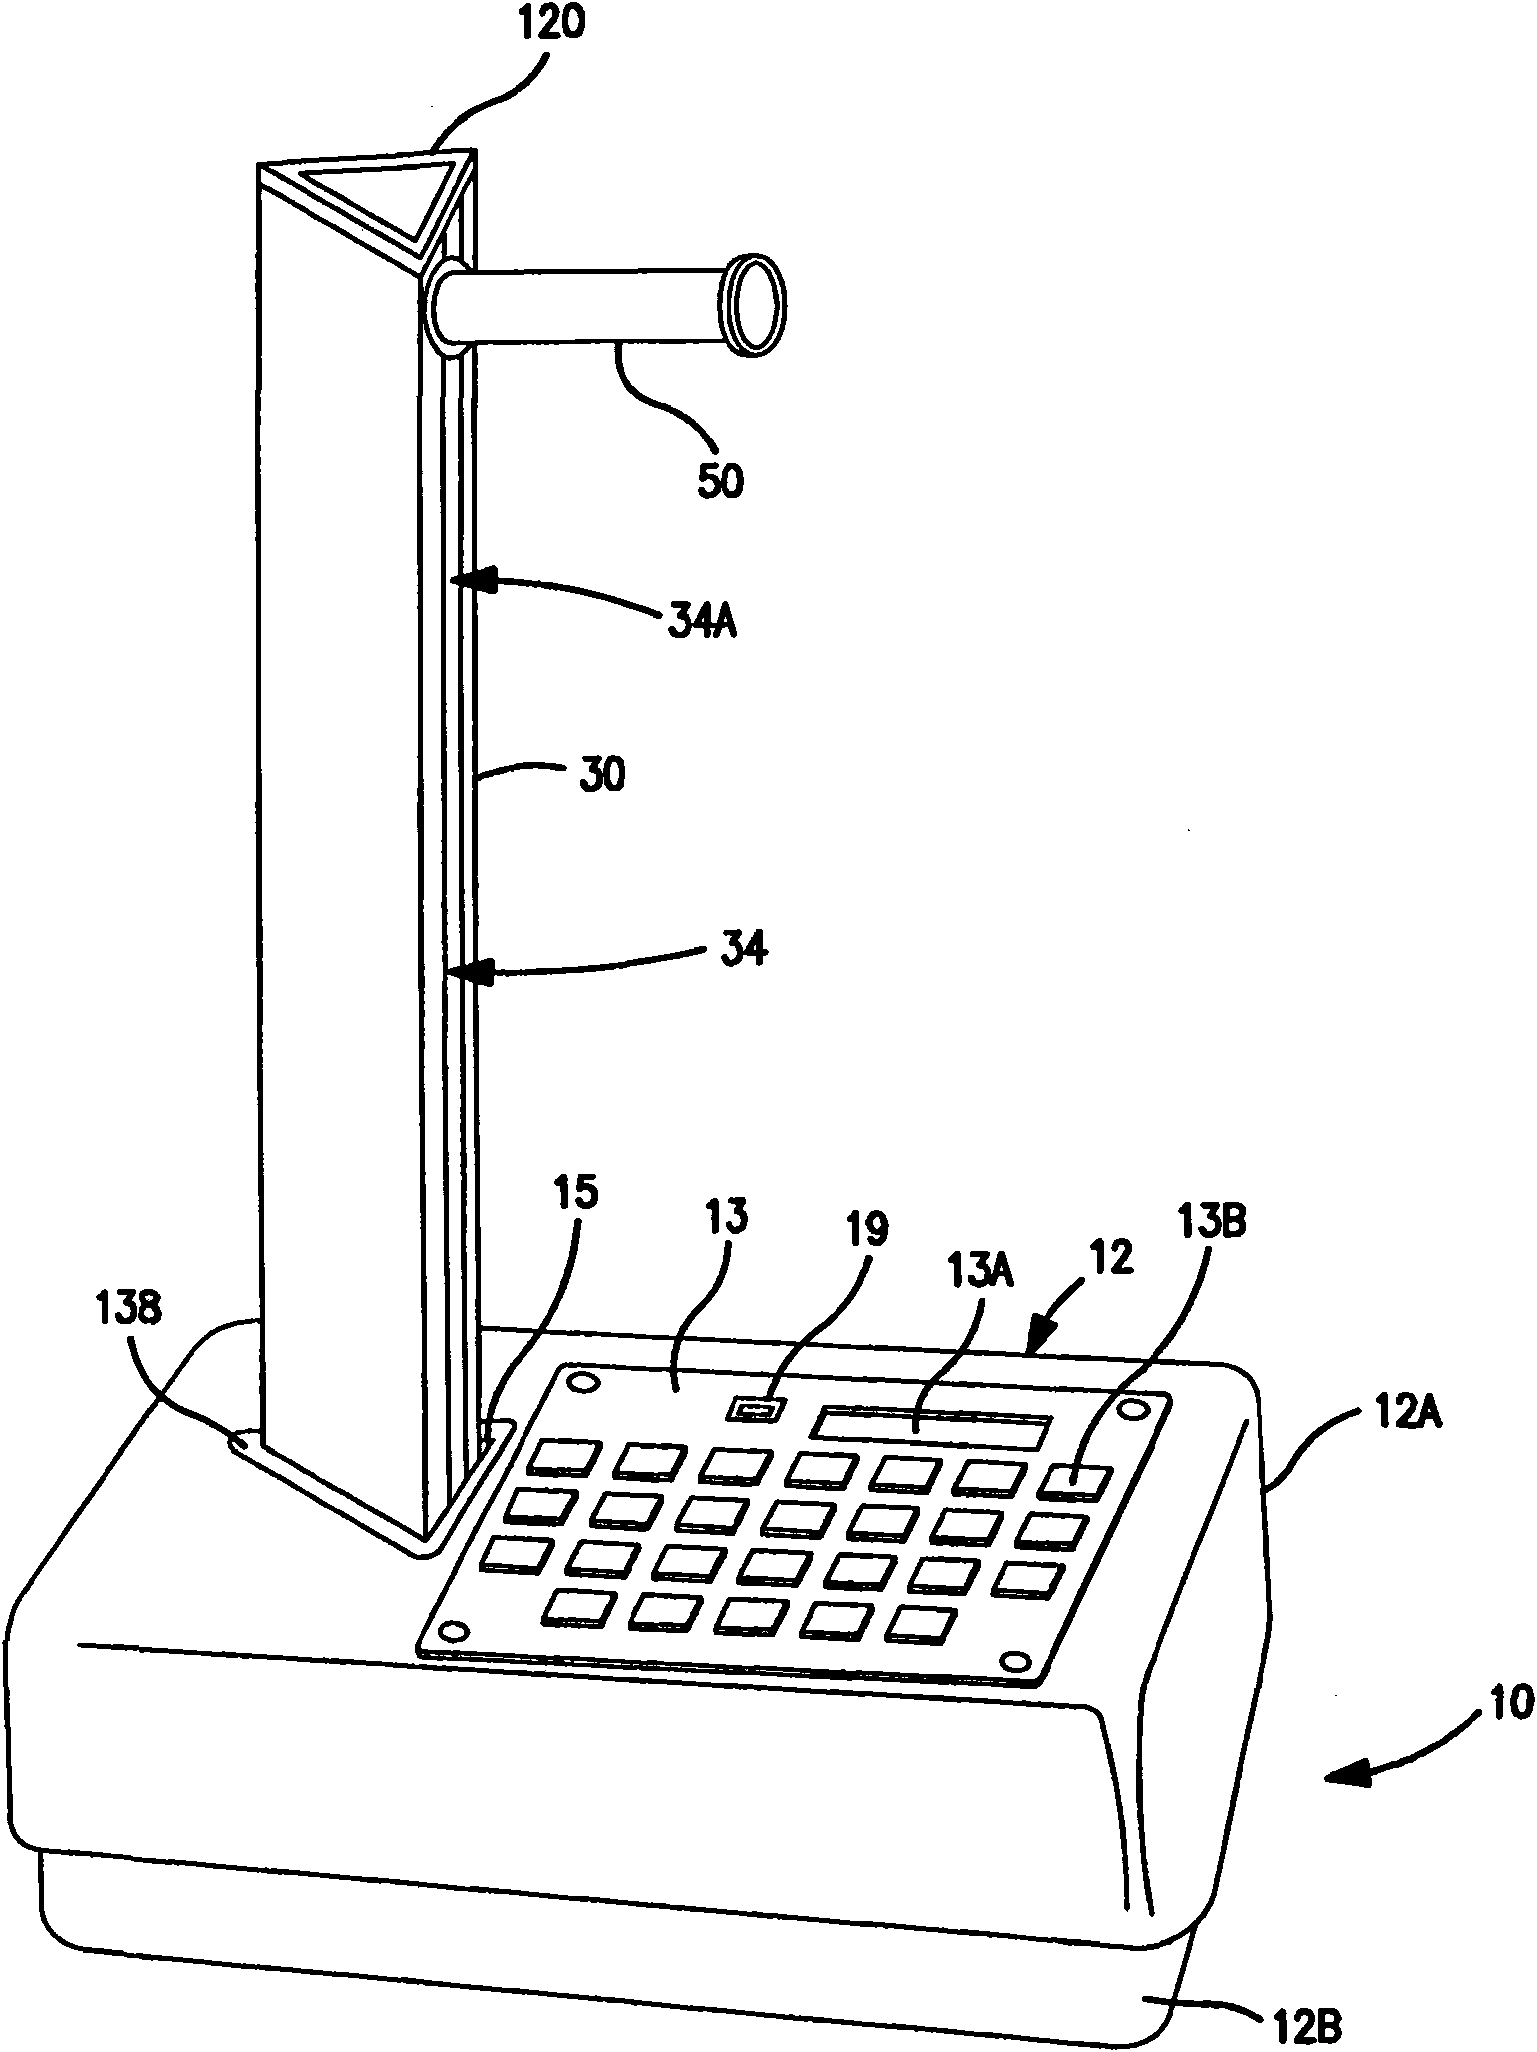 Nuclear gauges and methods of configuration and calibration of nuclear gauges